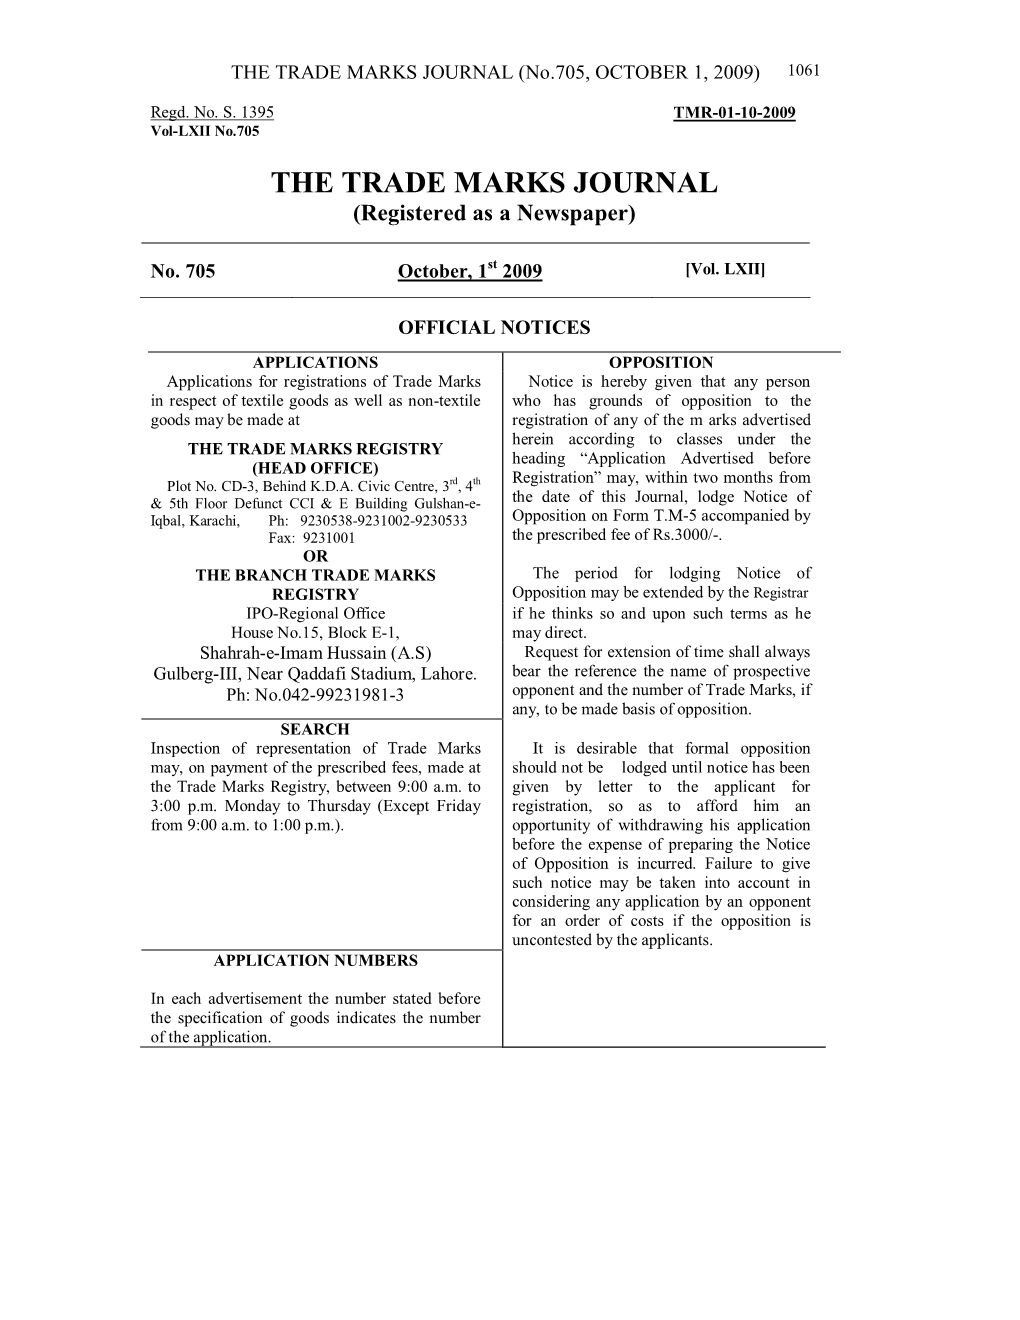 THE TRADE MARKS JOURNAL (No.705, OCTOBER 1, 2009) 1061